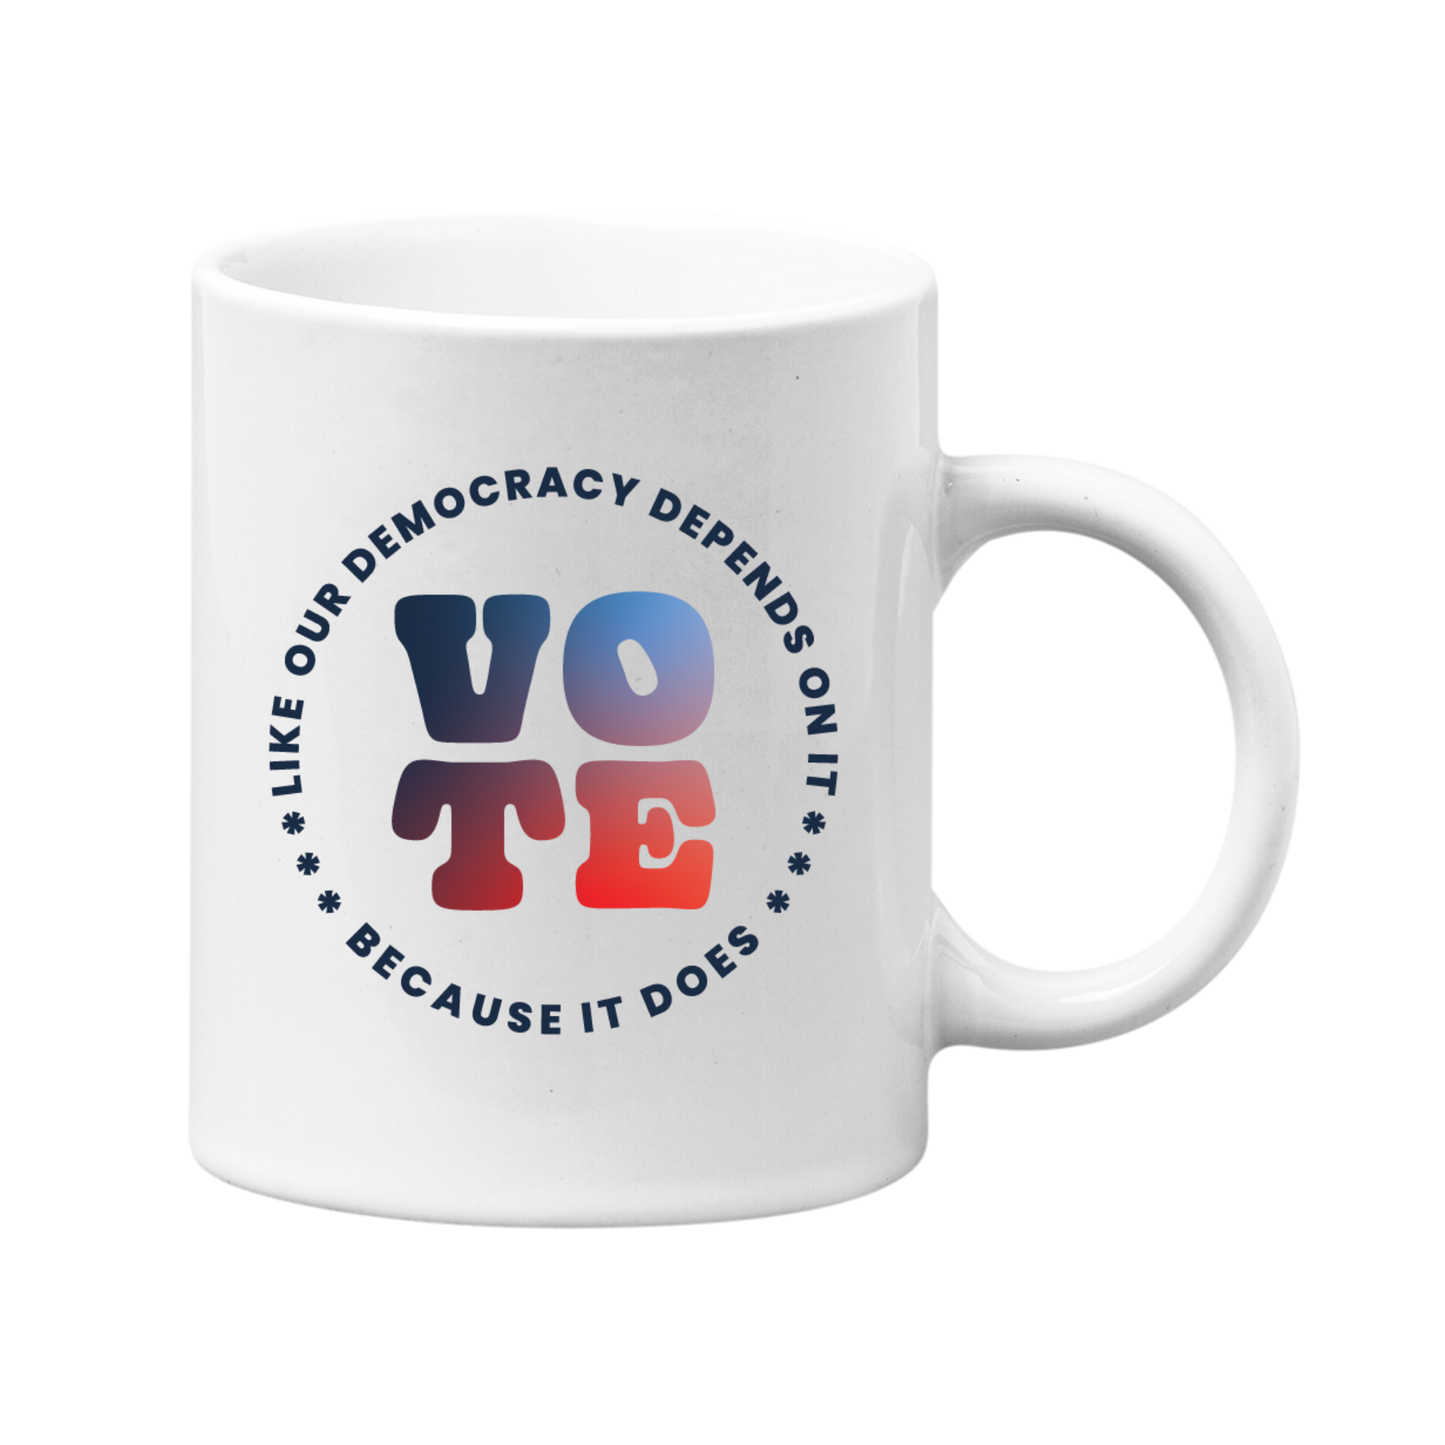 Vote Like Our Democracy Depends On It Mug